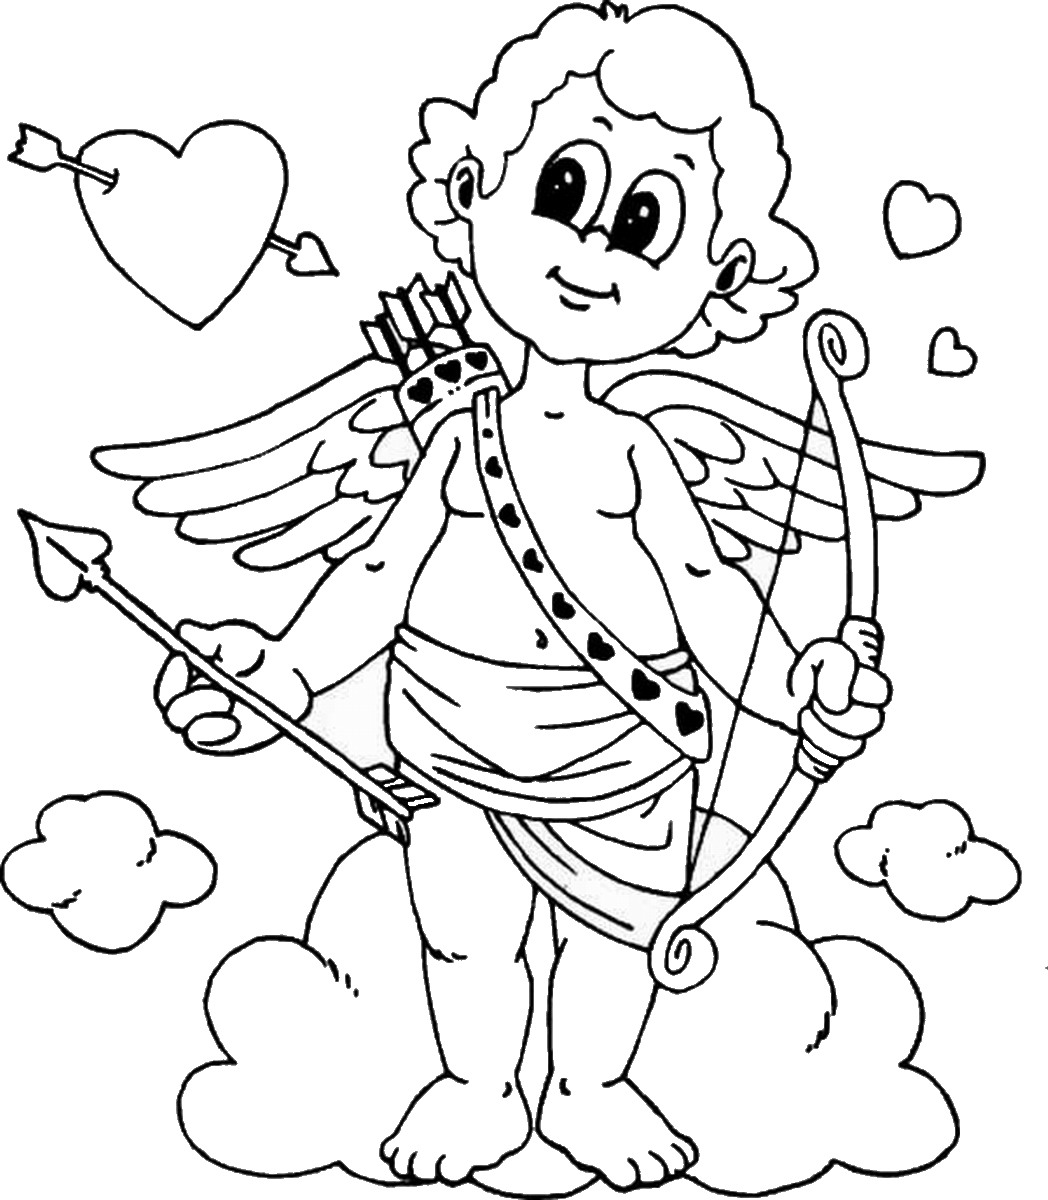 free-valentines-coloring-pages-home-design-ideas